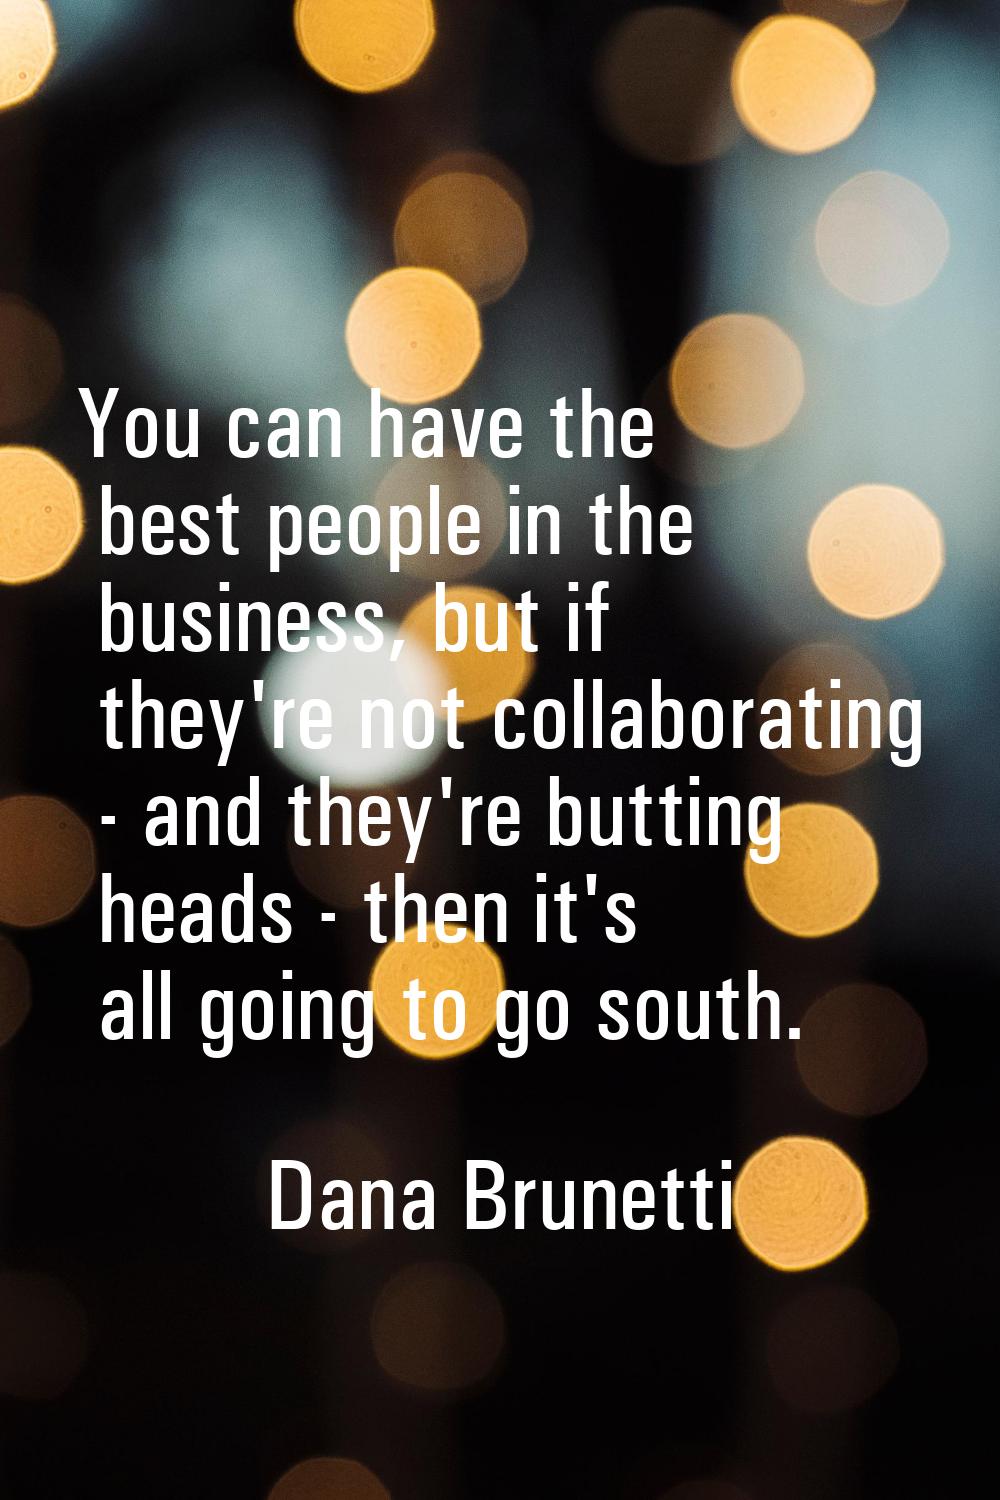 You can have the best people in the business, but if they're not collaborating - and they're buttin